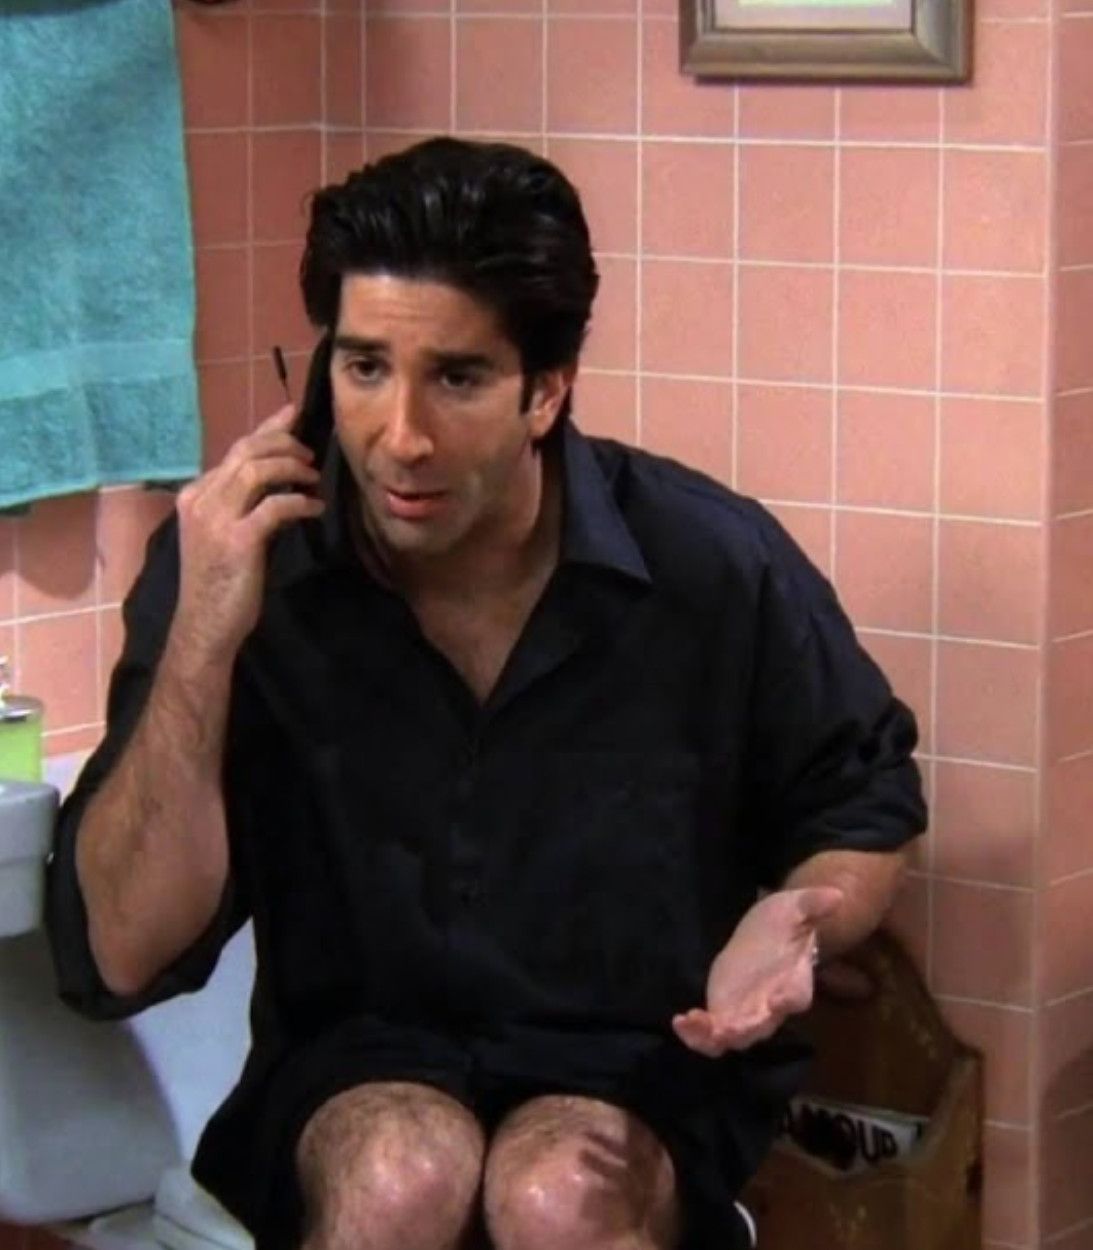 Ross can't get his leather pants back on : r/howyoudoin